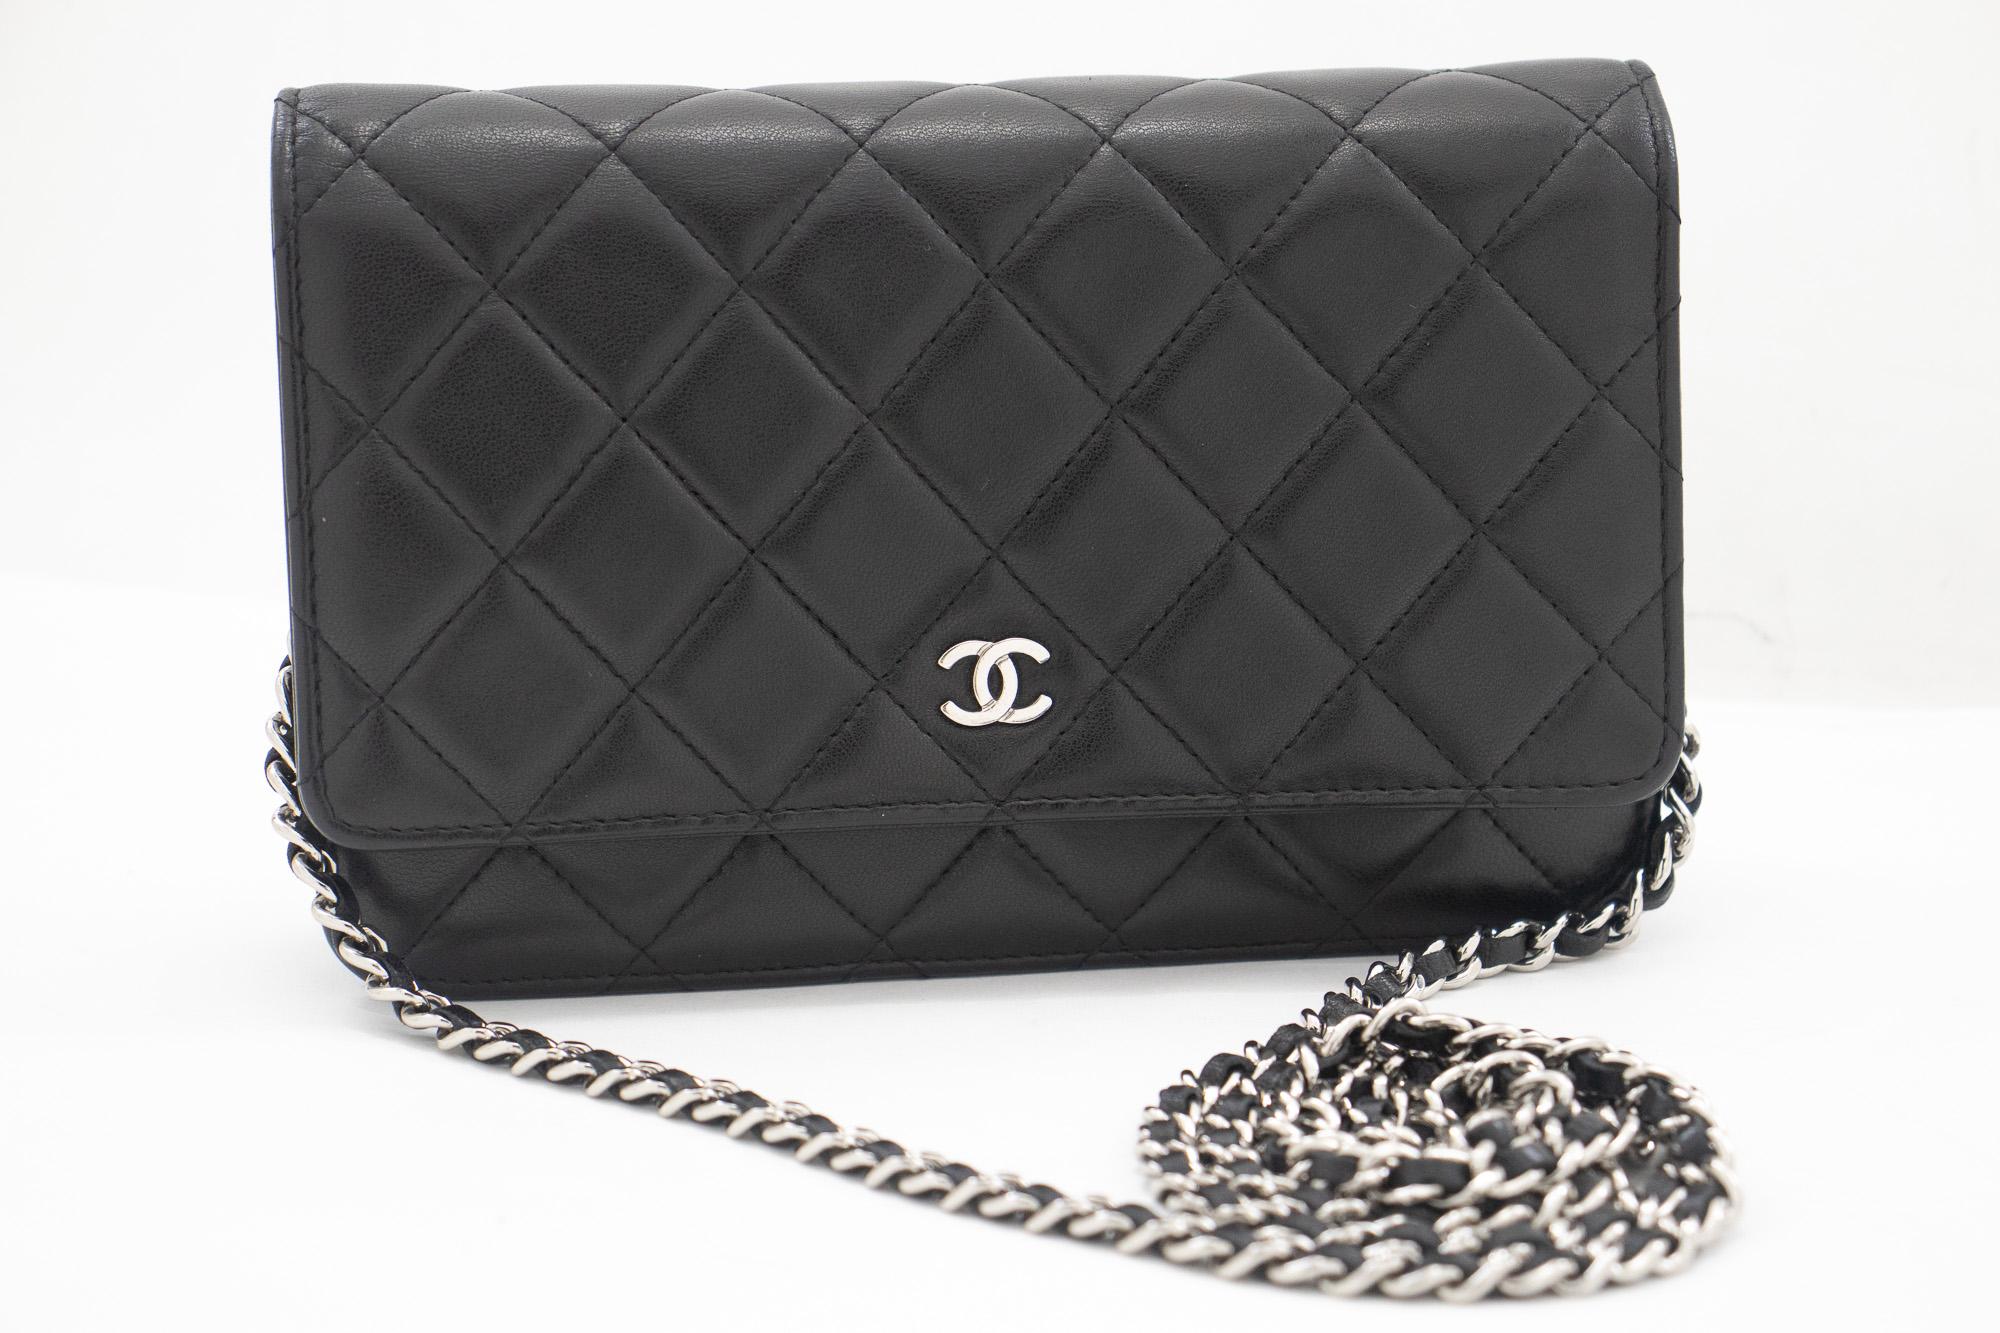 An authentic CHANEL Black Classic Wallet On Chain WOC Shoulder Bag made of black Lambskin. The color is Black. The outside material is Leather. The pattern is Solid. This item is Contemporary. The year of manufacture would be 2015.
Conditions &